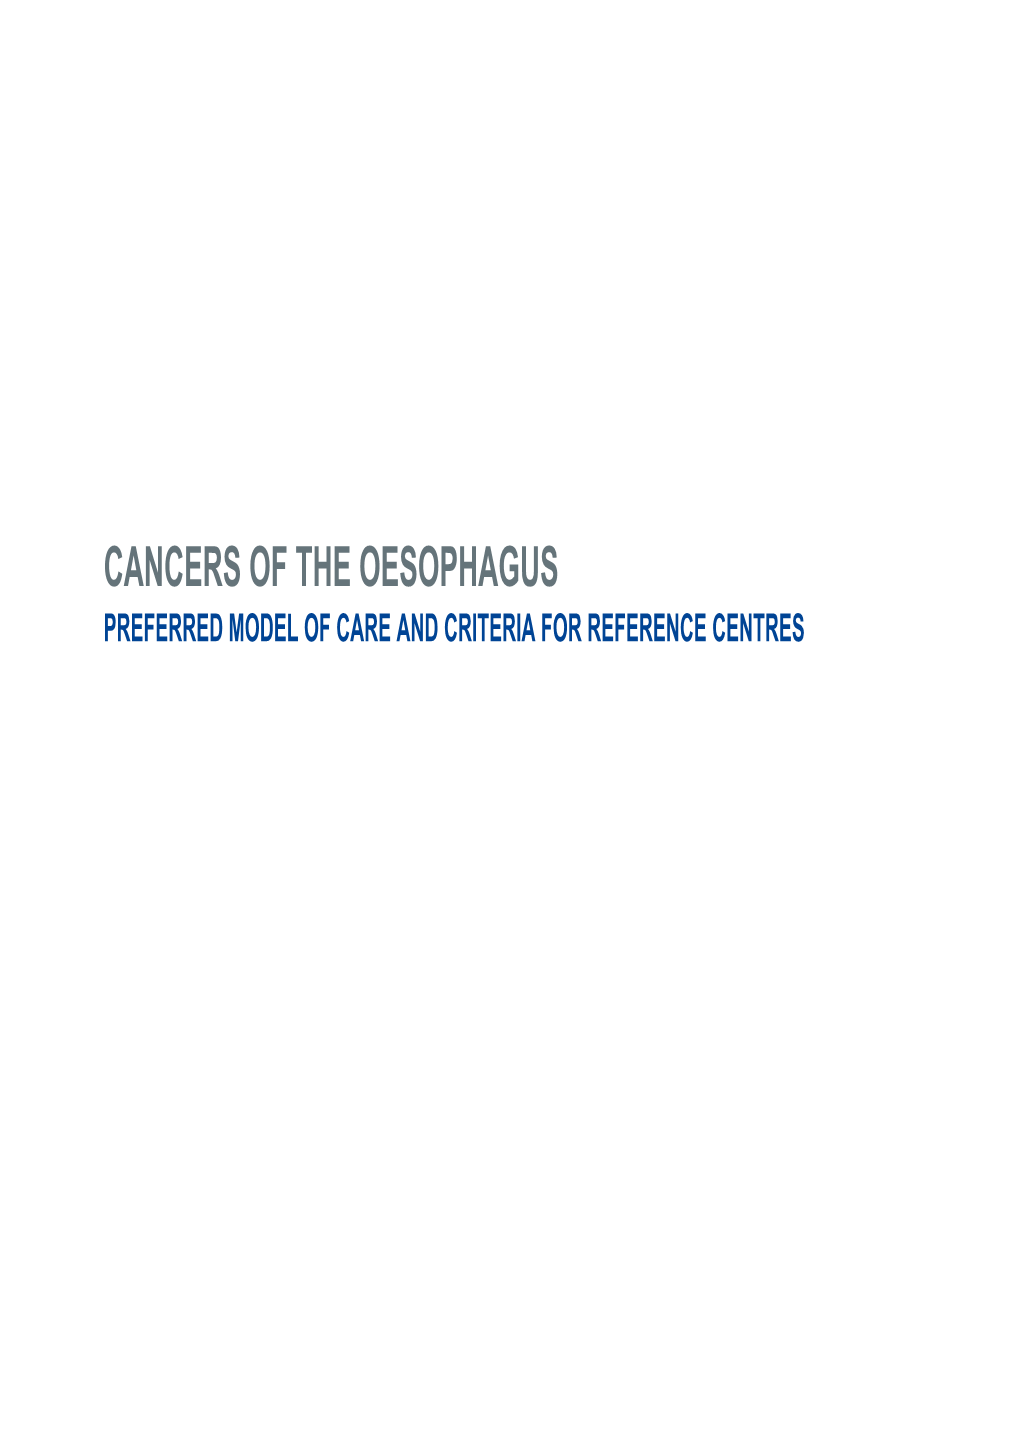 Cancers of the Oesophagus Preferred Model of Care and Criteria for Reference Centres